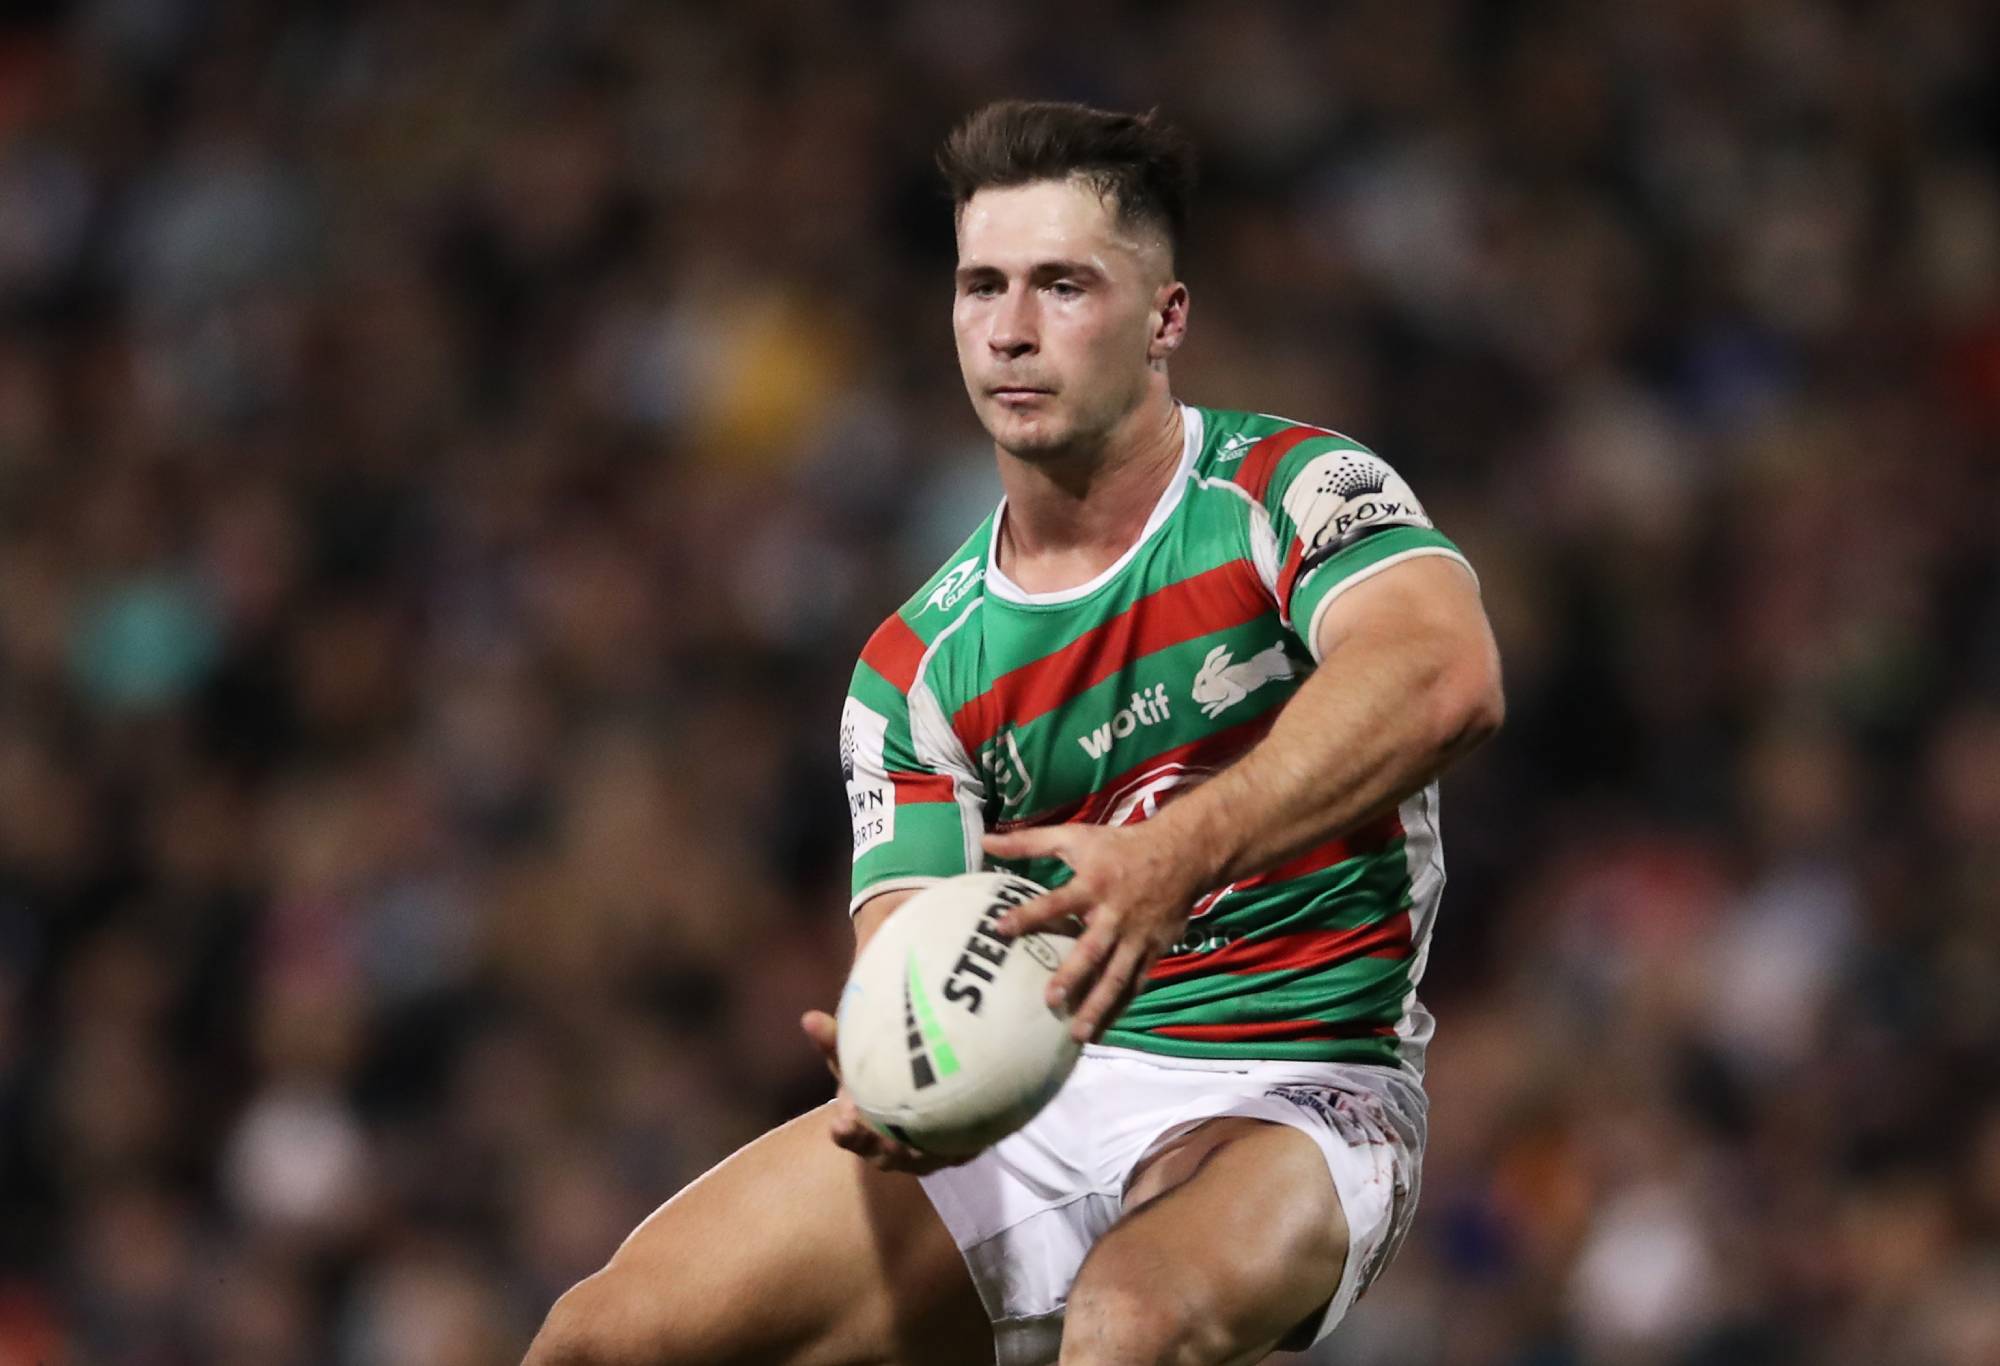 PENRITH, AUSTRALIA - APRIL 01: Lachlan Ilias of the Rabbitohs passes during the round four NRL match between the Penrith Panthers and the South Sydney Rabbitohs at BlueBet Stadium, on April 01, 2022, in Penrith, Australia. (Photo by Matt King/Getty Images)